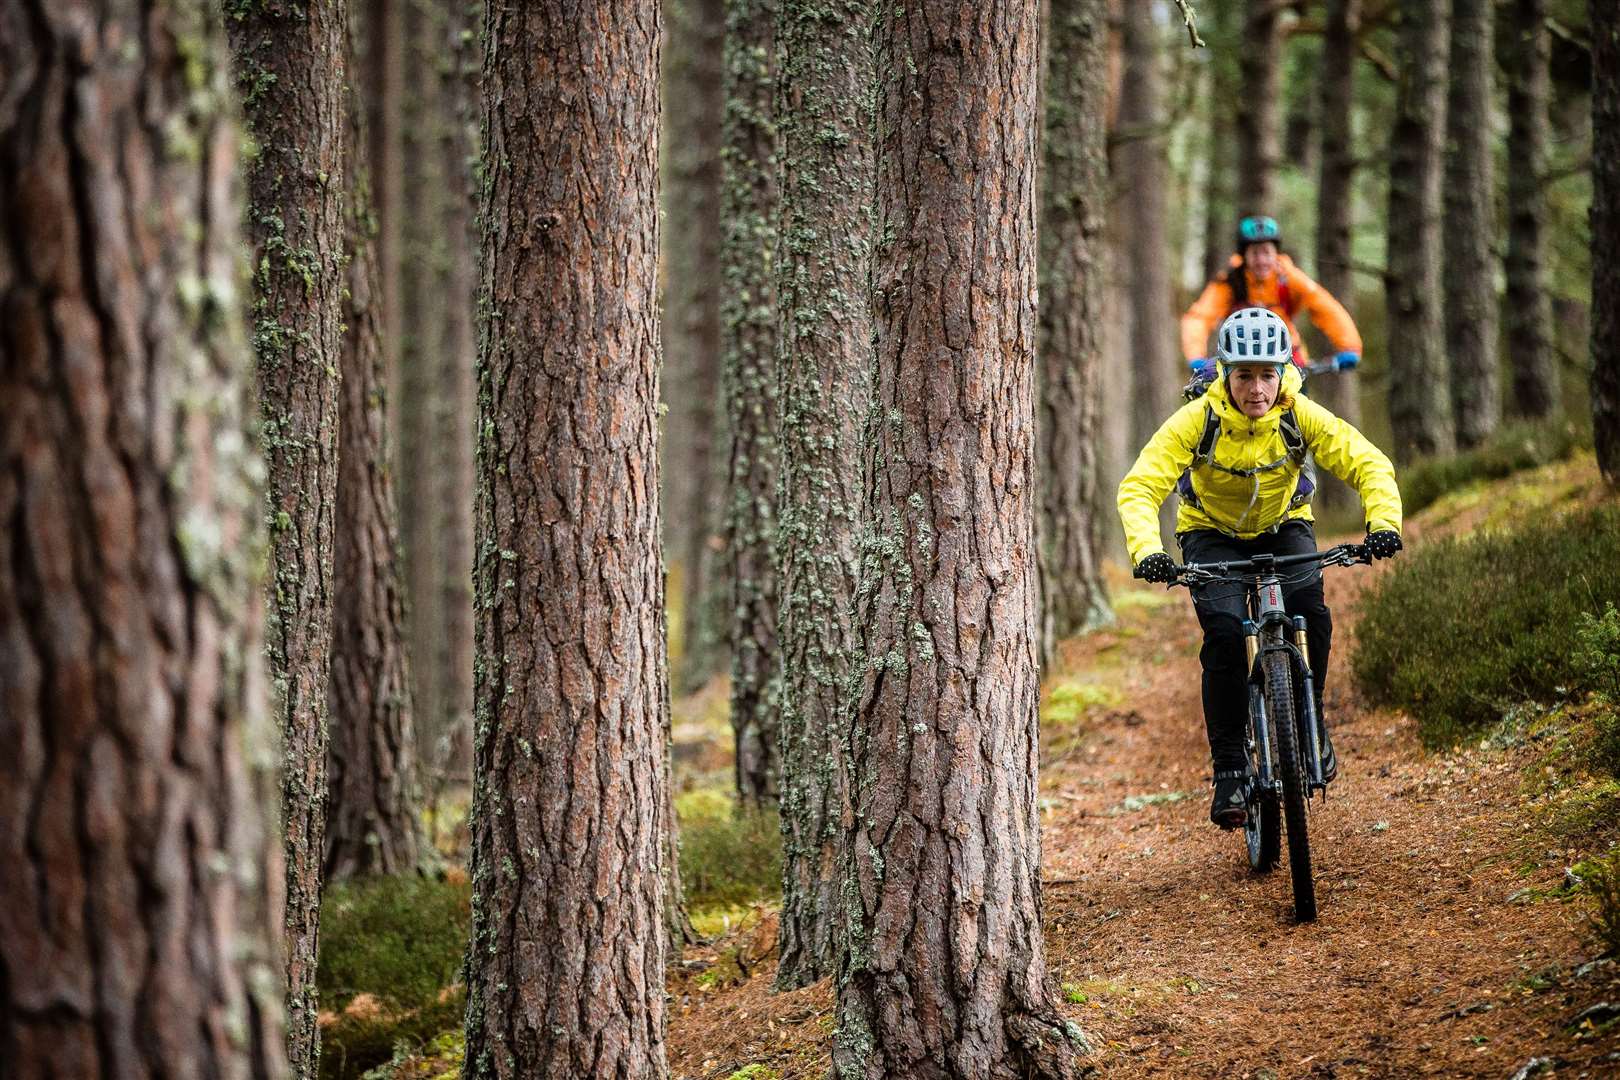 Mountain bikers are permitted to ride under the daily exercise allowance – but are being asked to follow government guidance. Picture: DMBinS